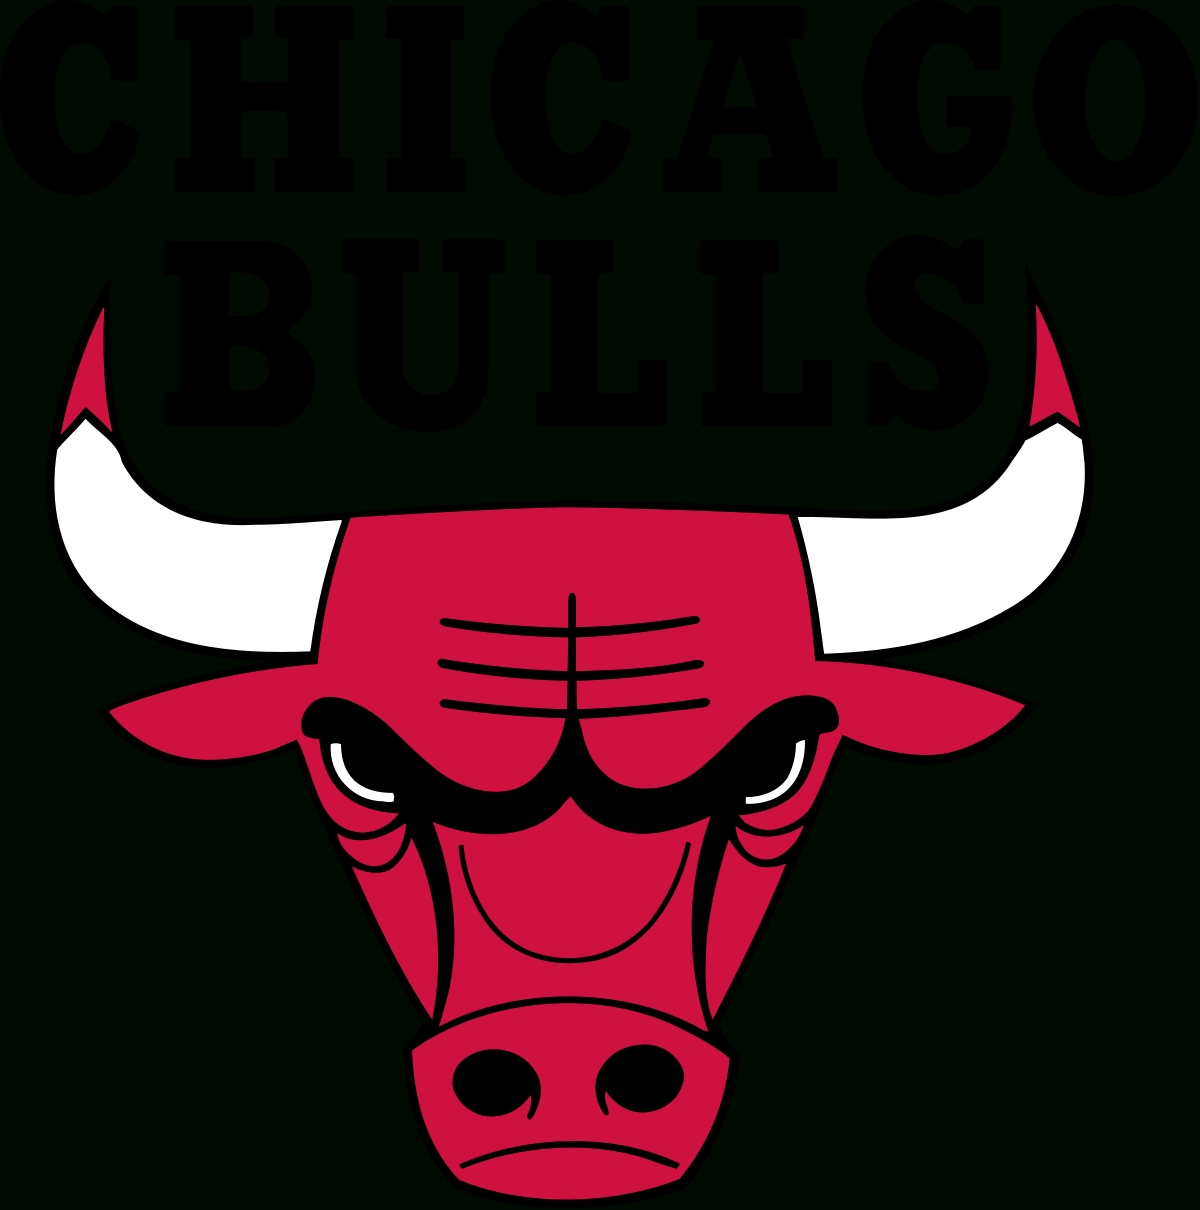 10 Top Pictures Of The Chicago Bulls FULL HD 1080p For PC Background